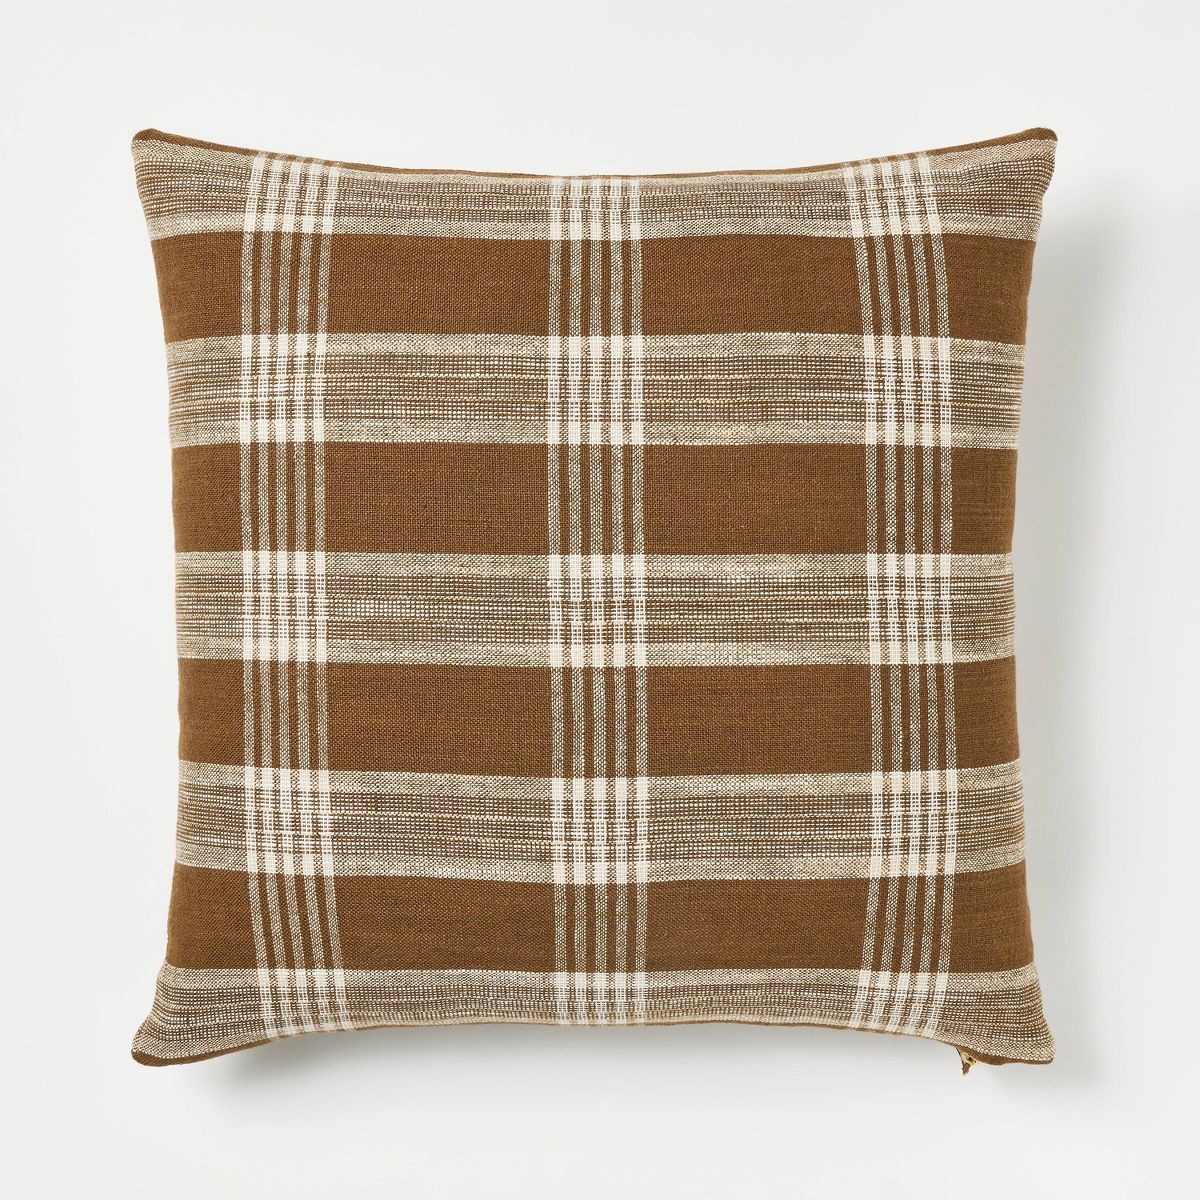 Woven Plaid Square Throw Pillow with Zipper Pull Brown - Threshold™ designed with Studio McGee | Target